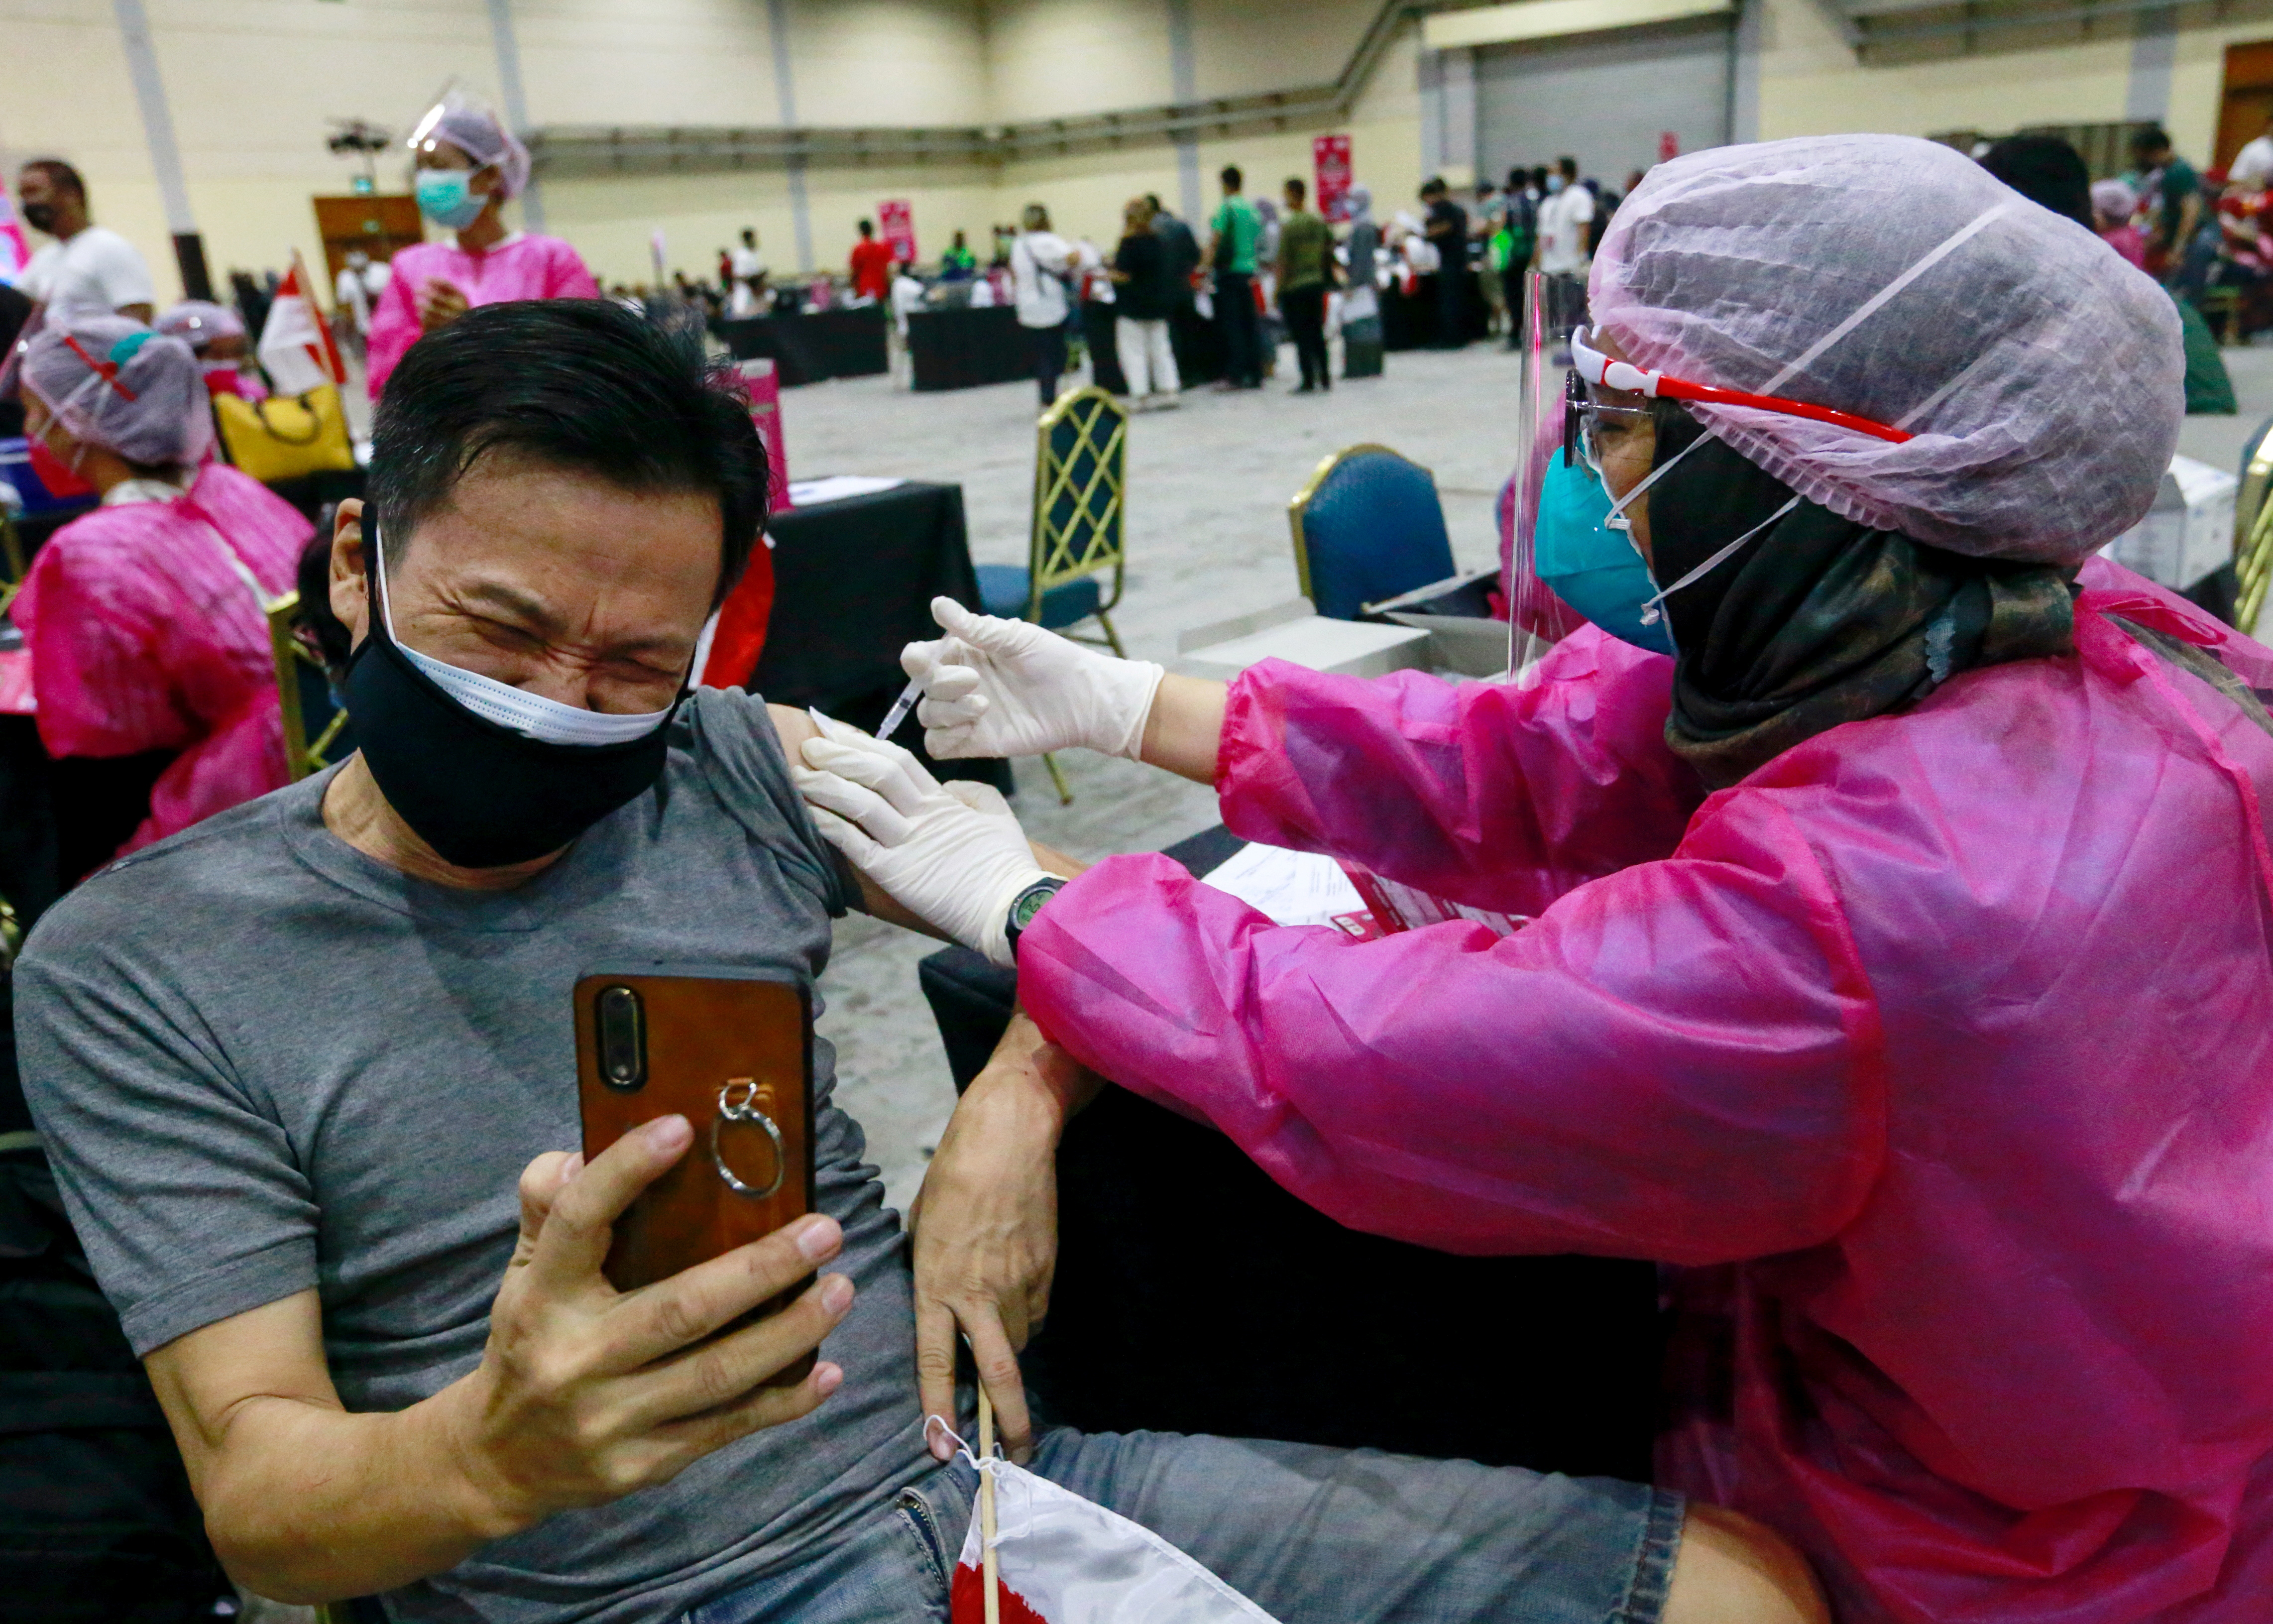 Mass vaccination program at the Jakarta Convention Center building